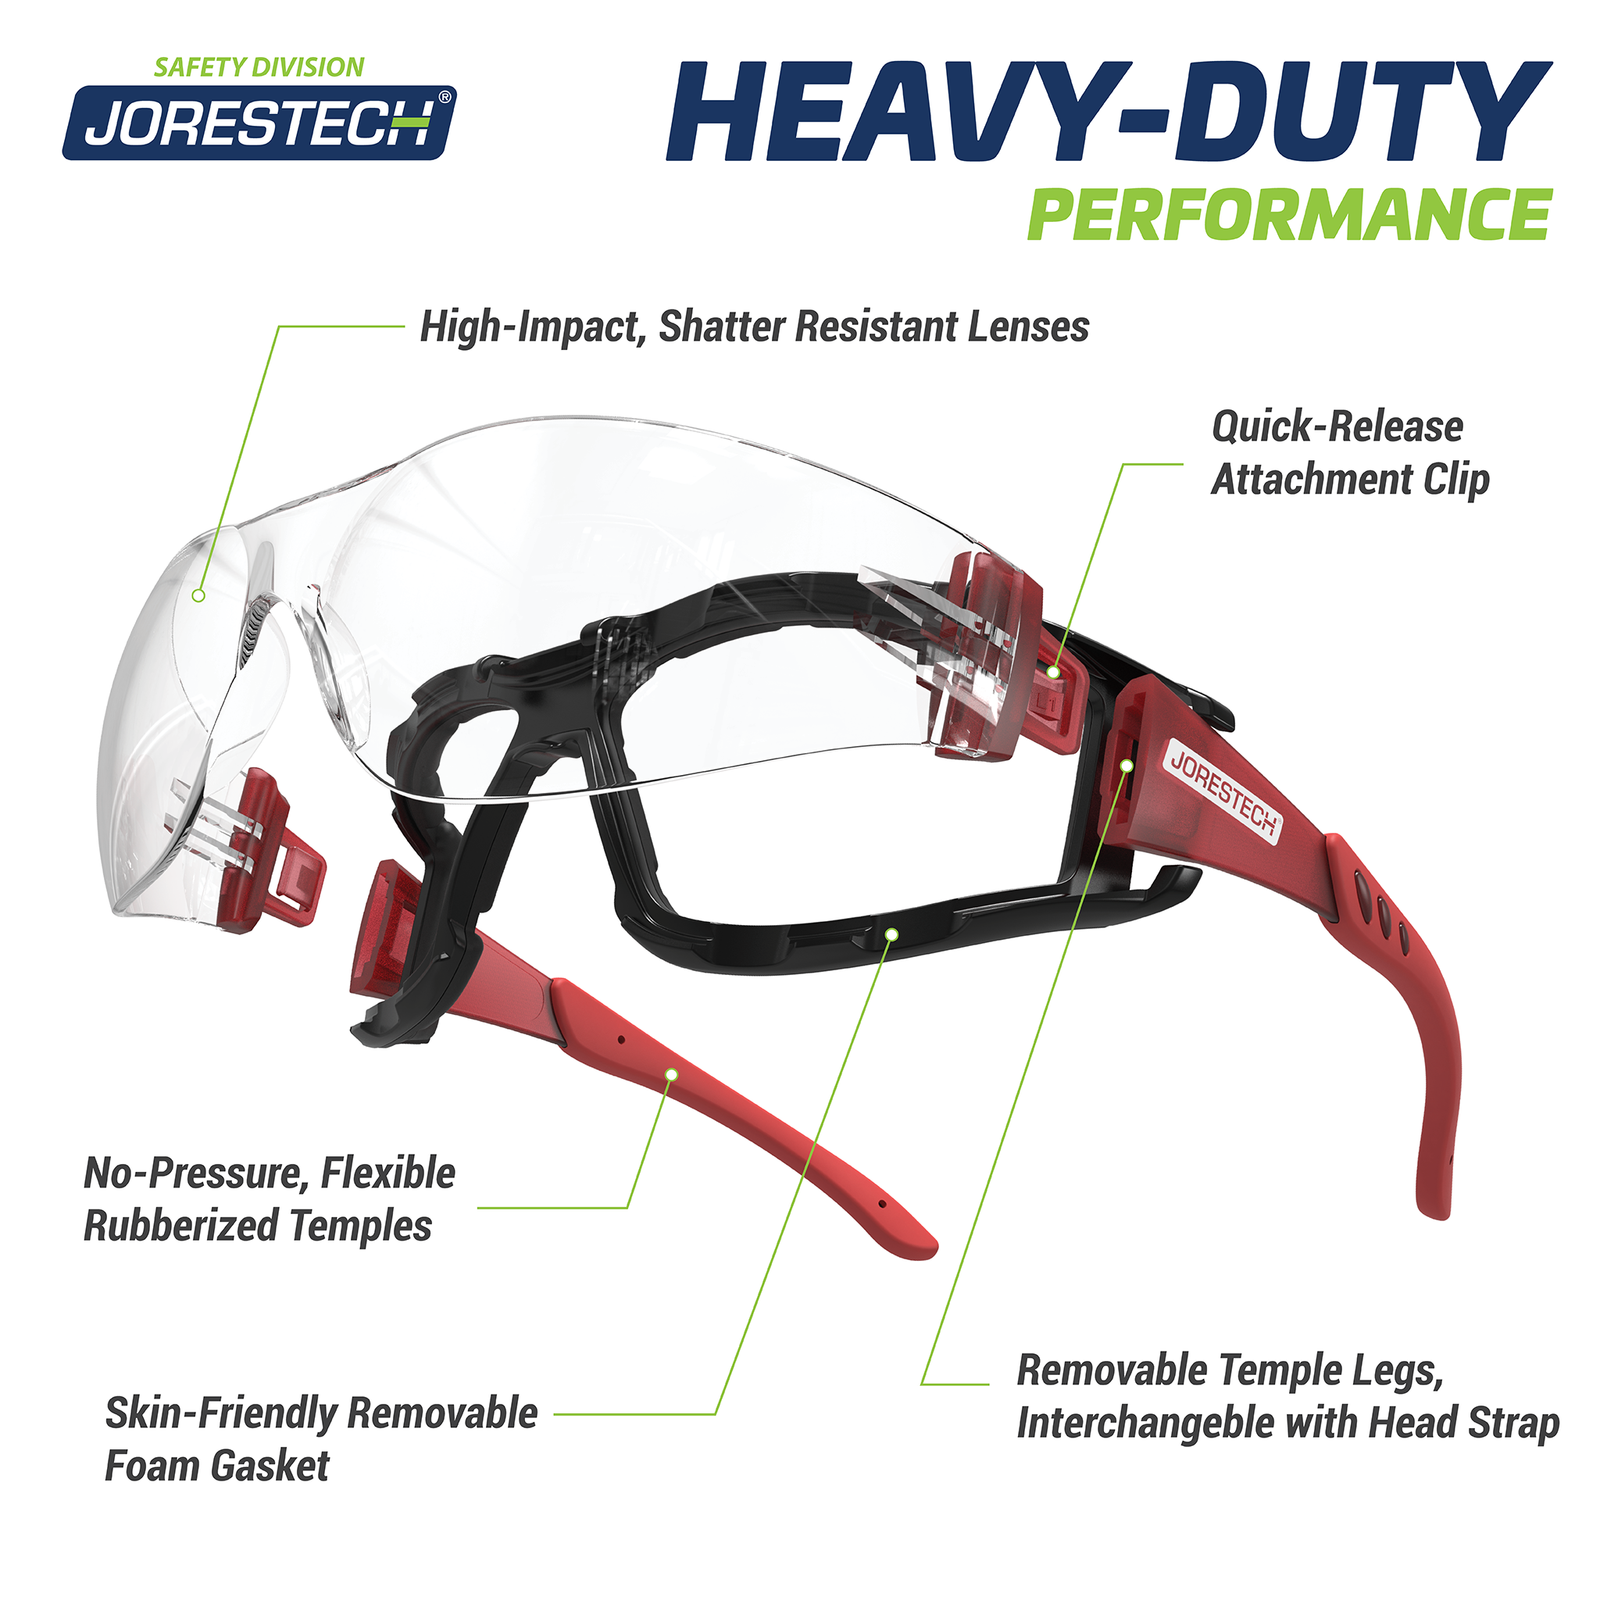 Shows the JORESTECH red and clear anti fog high impact safety glasses with removable foam seal gasket and temples. Call out read: High impact shattering resistant lenses, no pressure, flexible rubberized temples, skin friendly removable foam gasket, quick release attachment clip, removable Temple legs, interchangeable with head strap